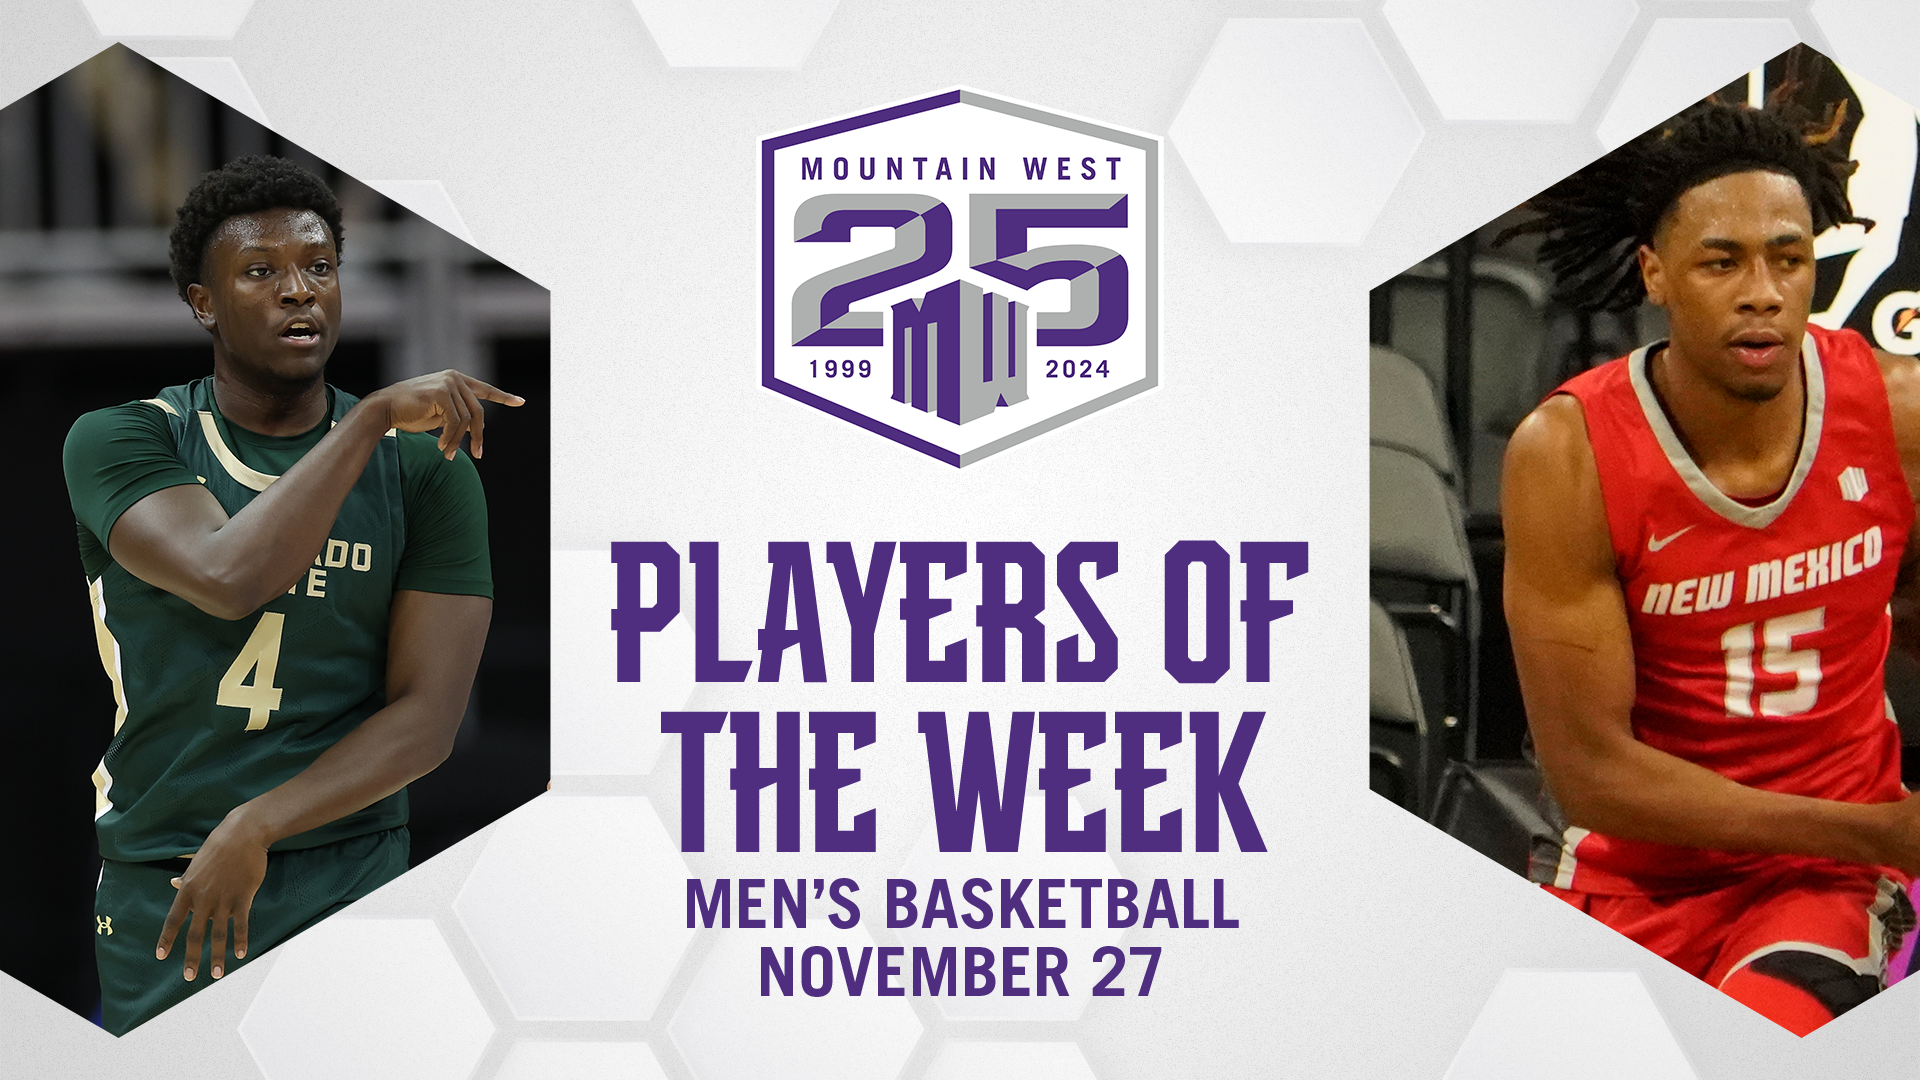 Mountain West Men's Basketball Player of the Week - Nov. 27